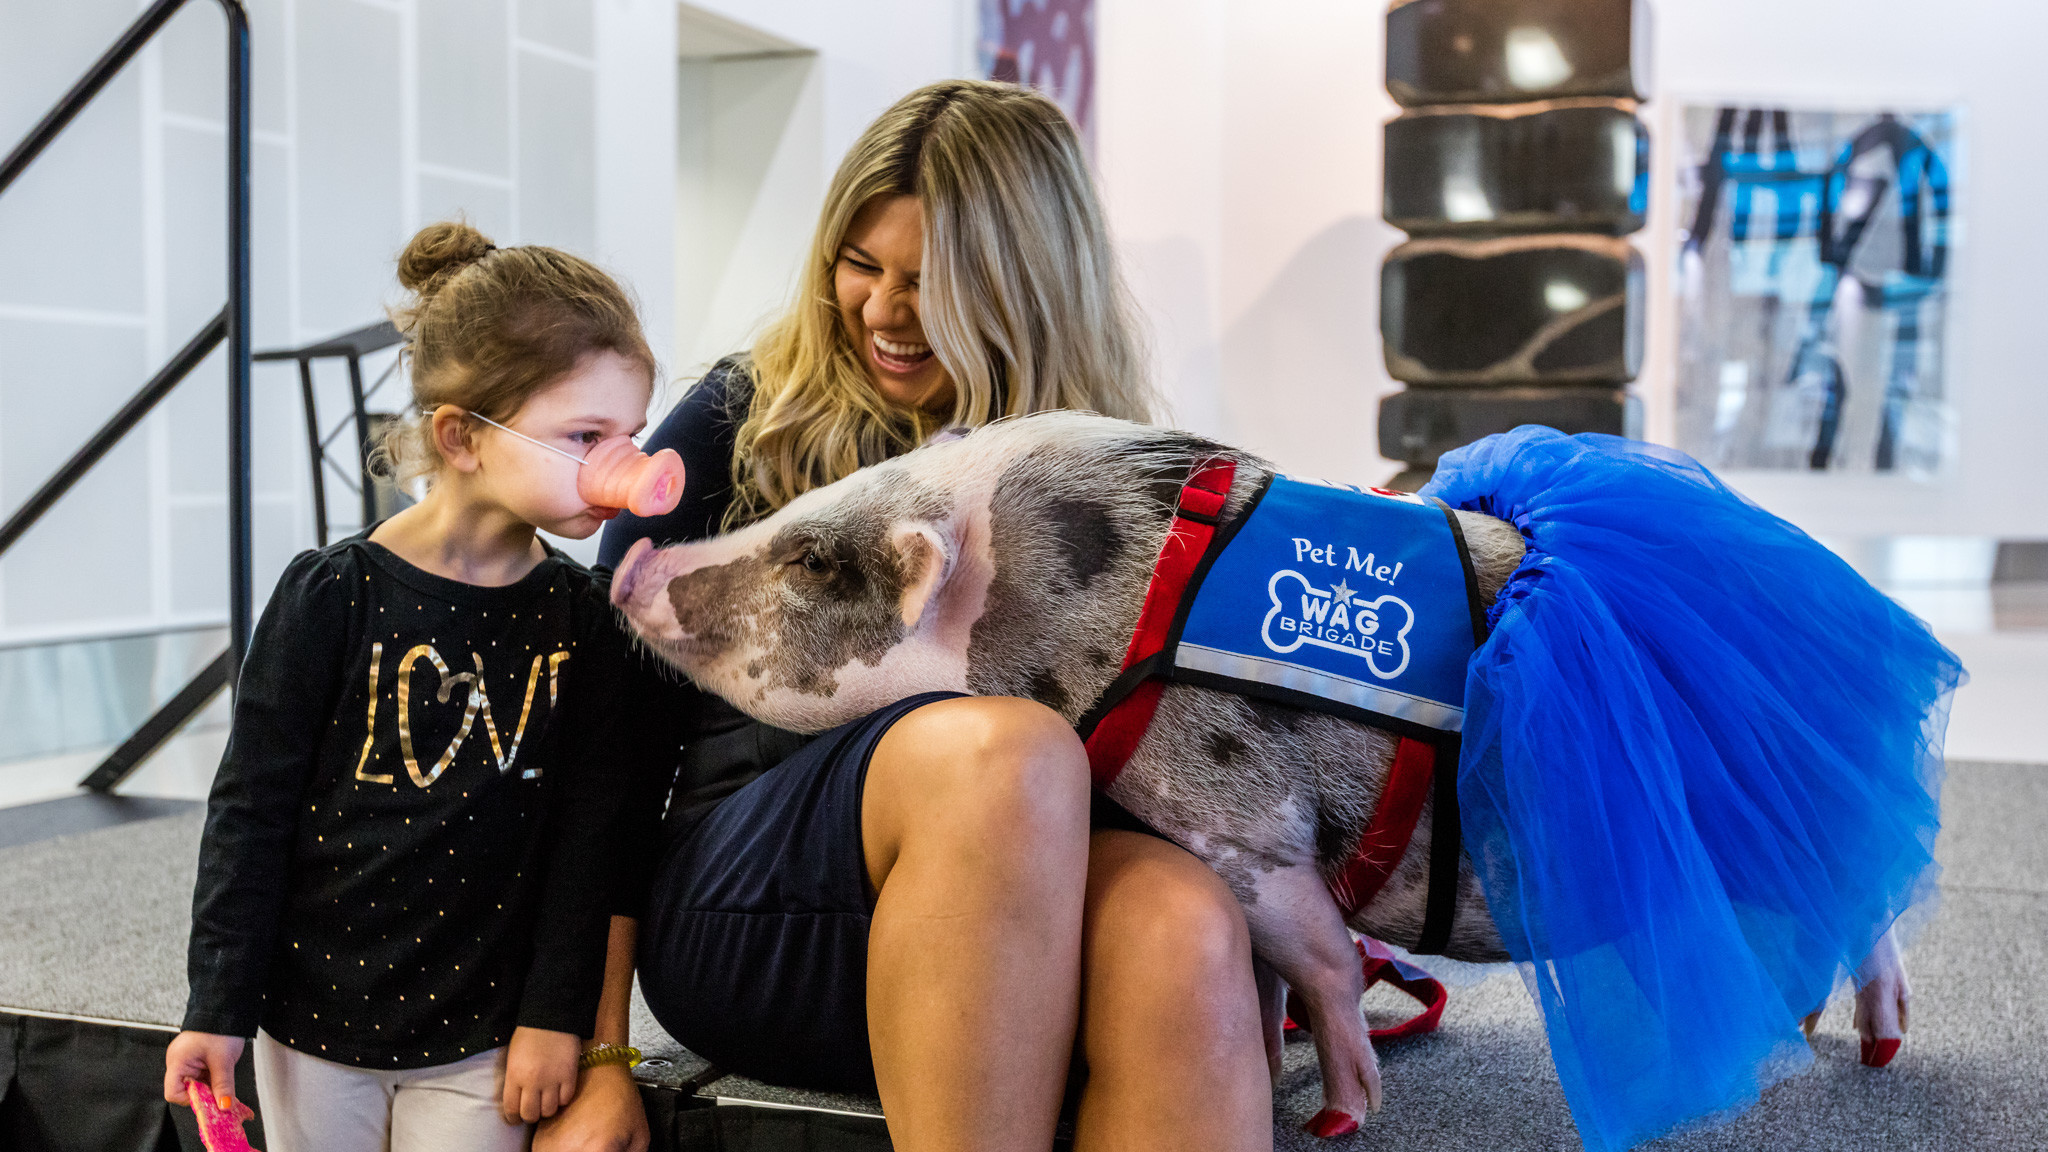 This little piggy is cheering up passengers at San Francisco's airport - Los Angeles Times